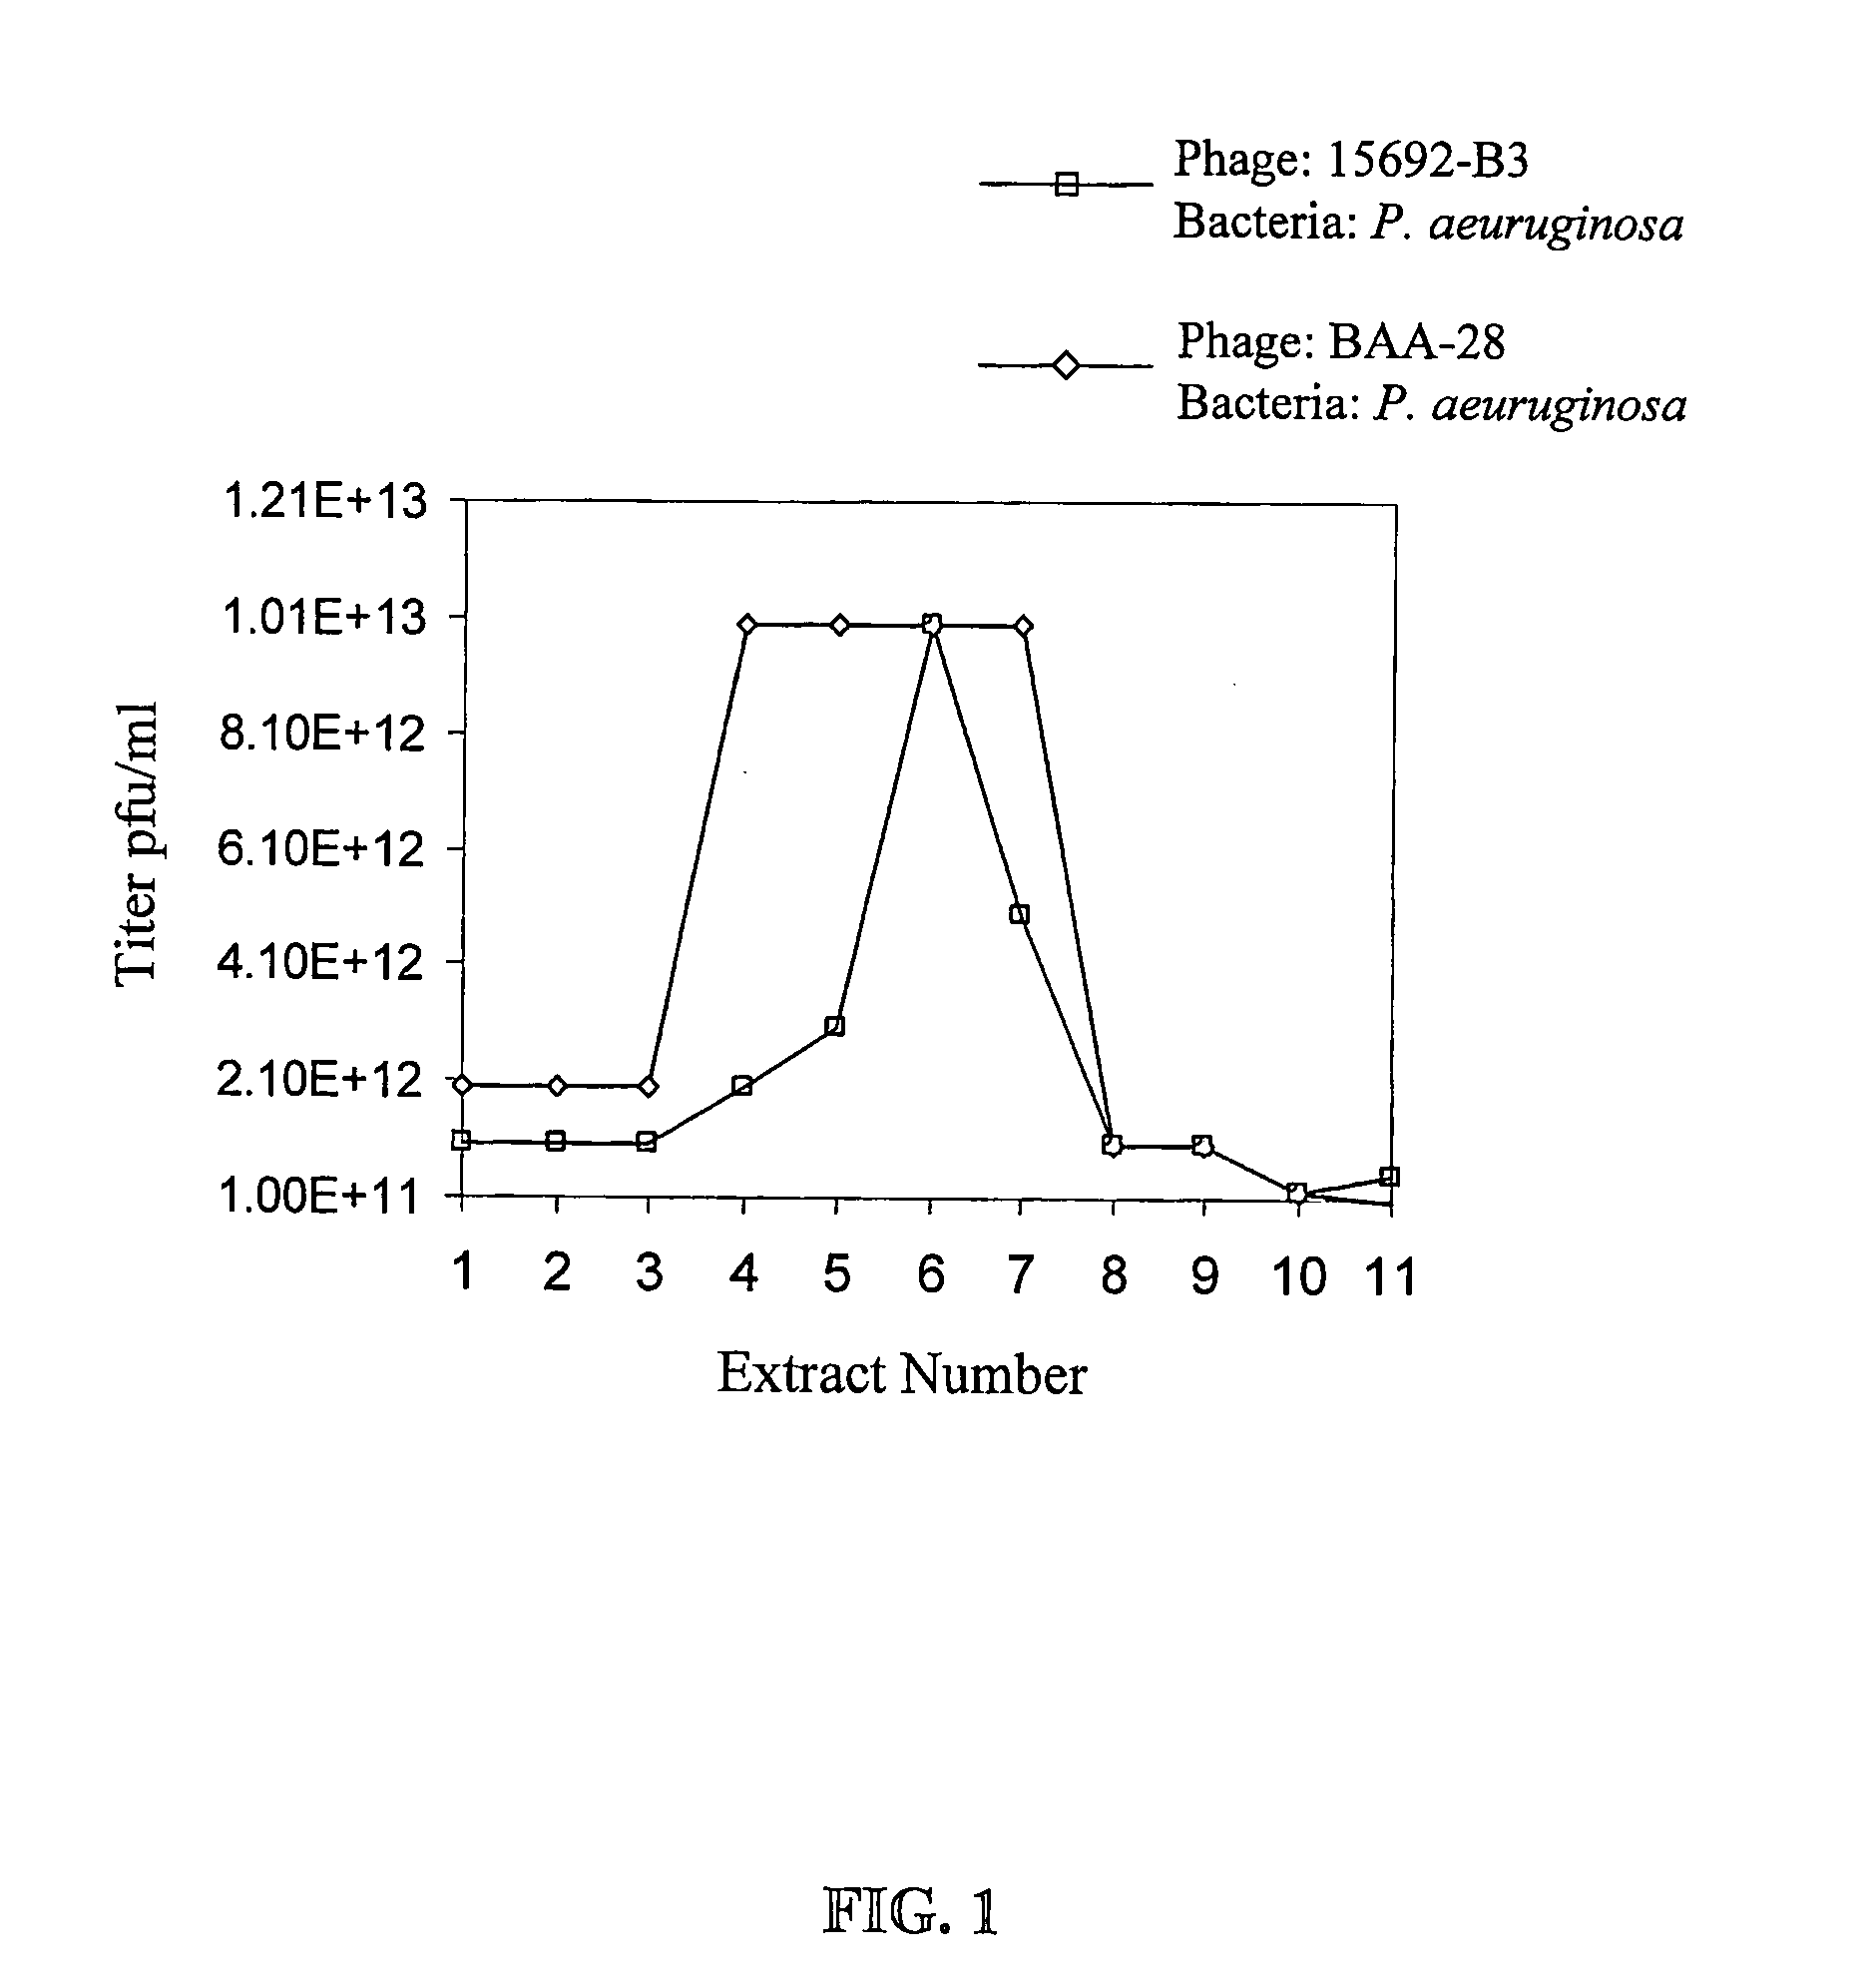 Production of bacteriophage compositions for use in phage therapy